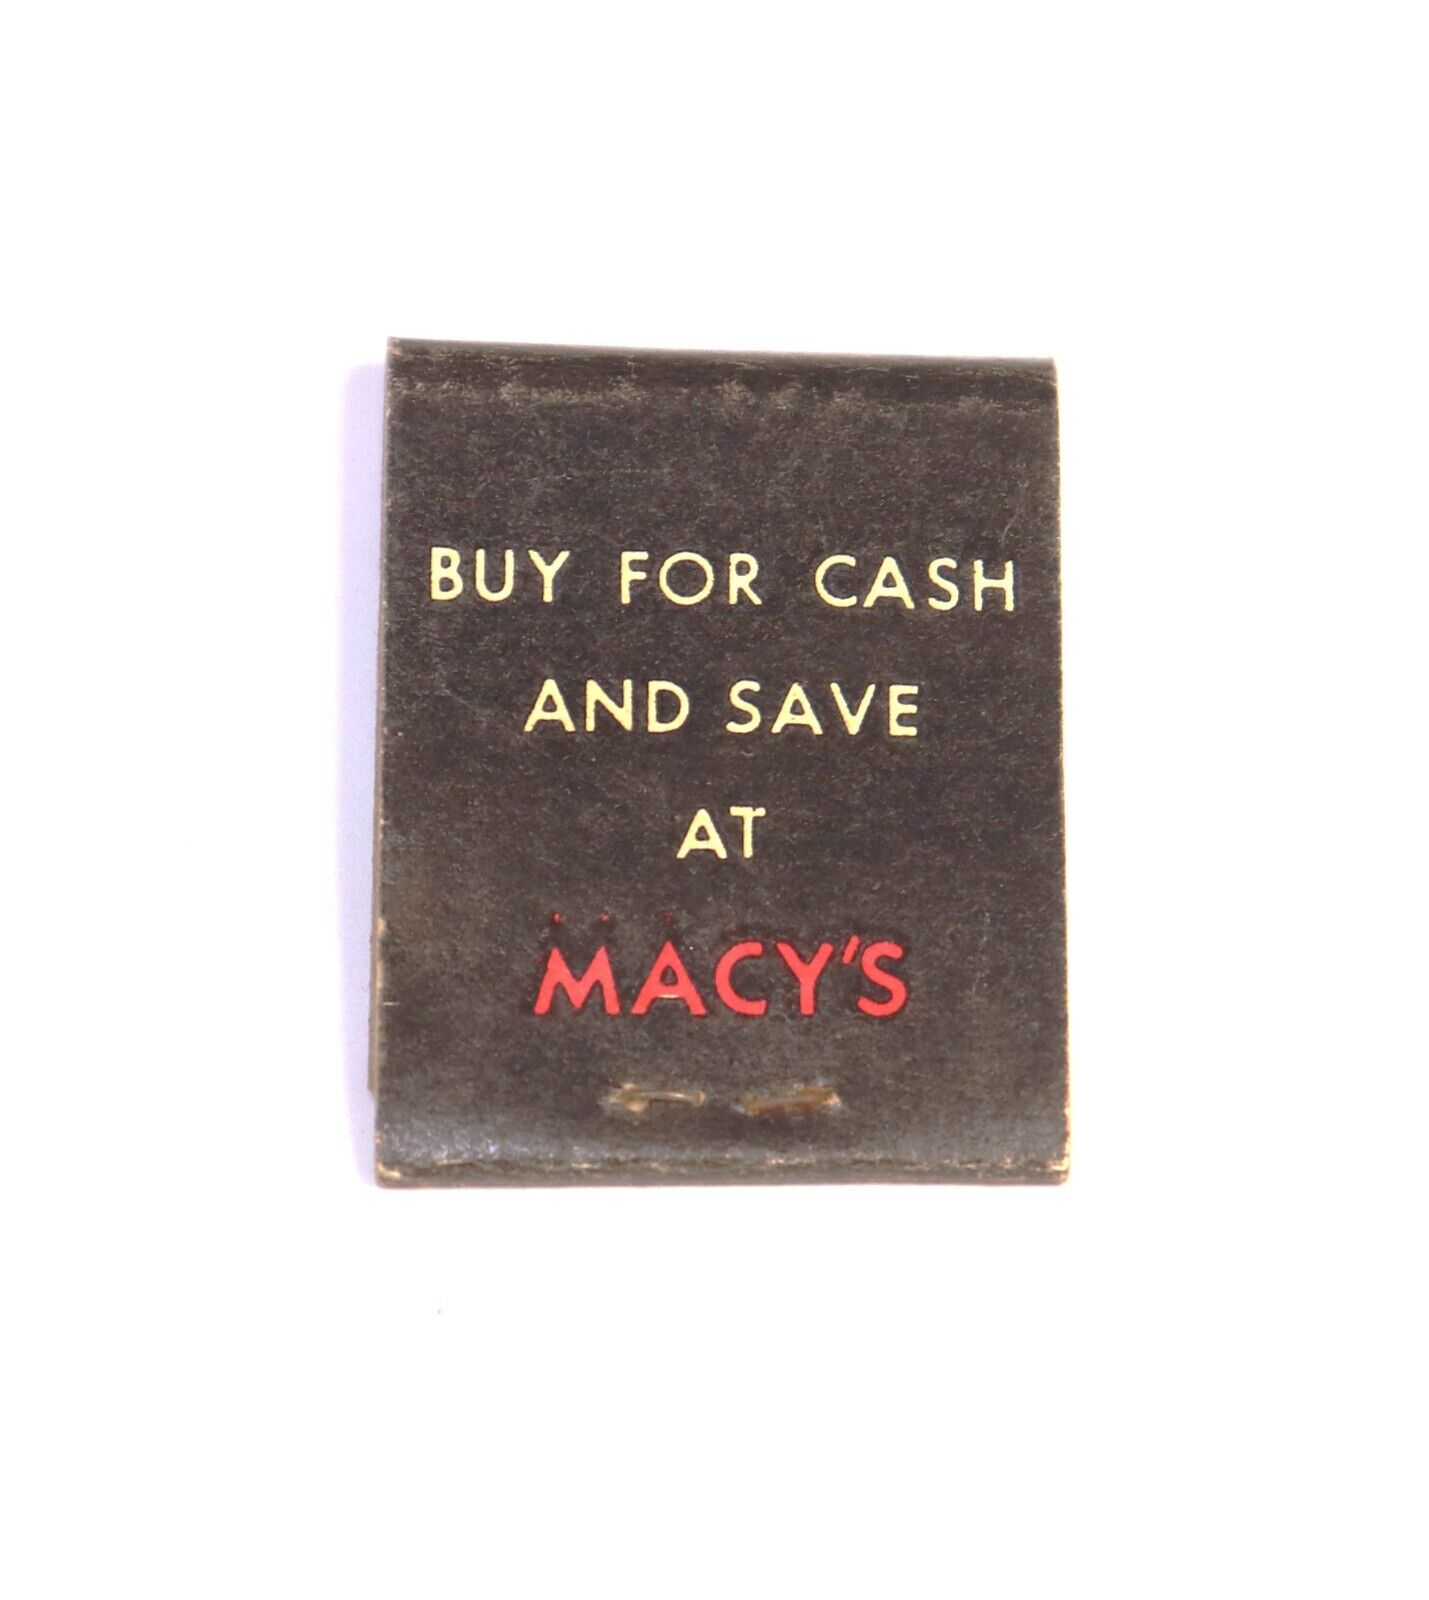 Vintage 1930s Macy\'s Buy For Cash And Save Shop The D.A. Way Full Matchbook